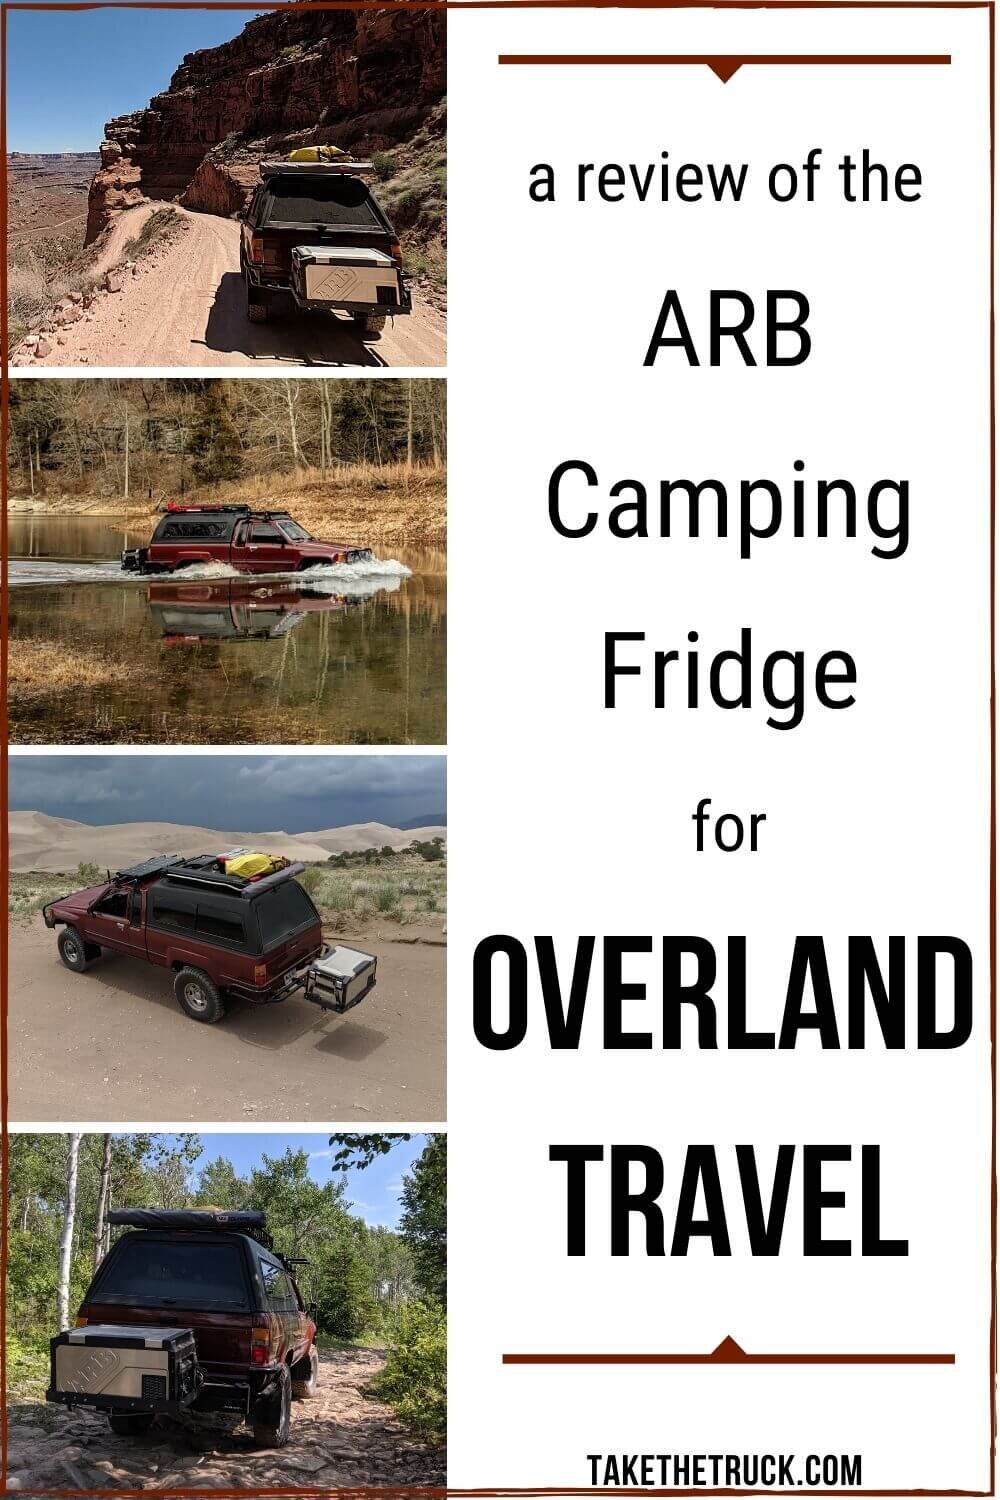 A review of the best fridge for overlanding - the ARB Elements Fridge. It's a weatherproof camping fridge great for truck camping.